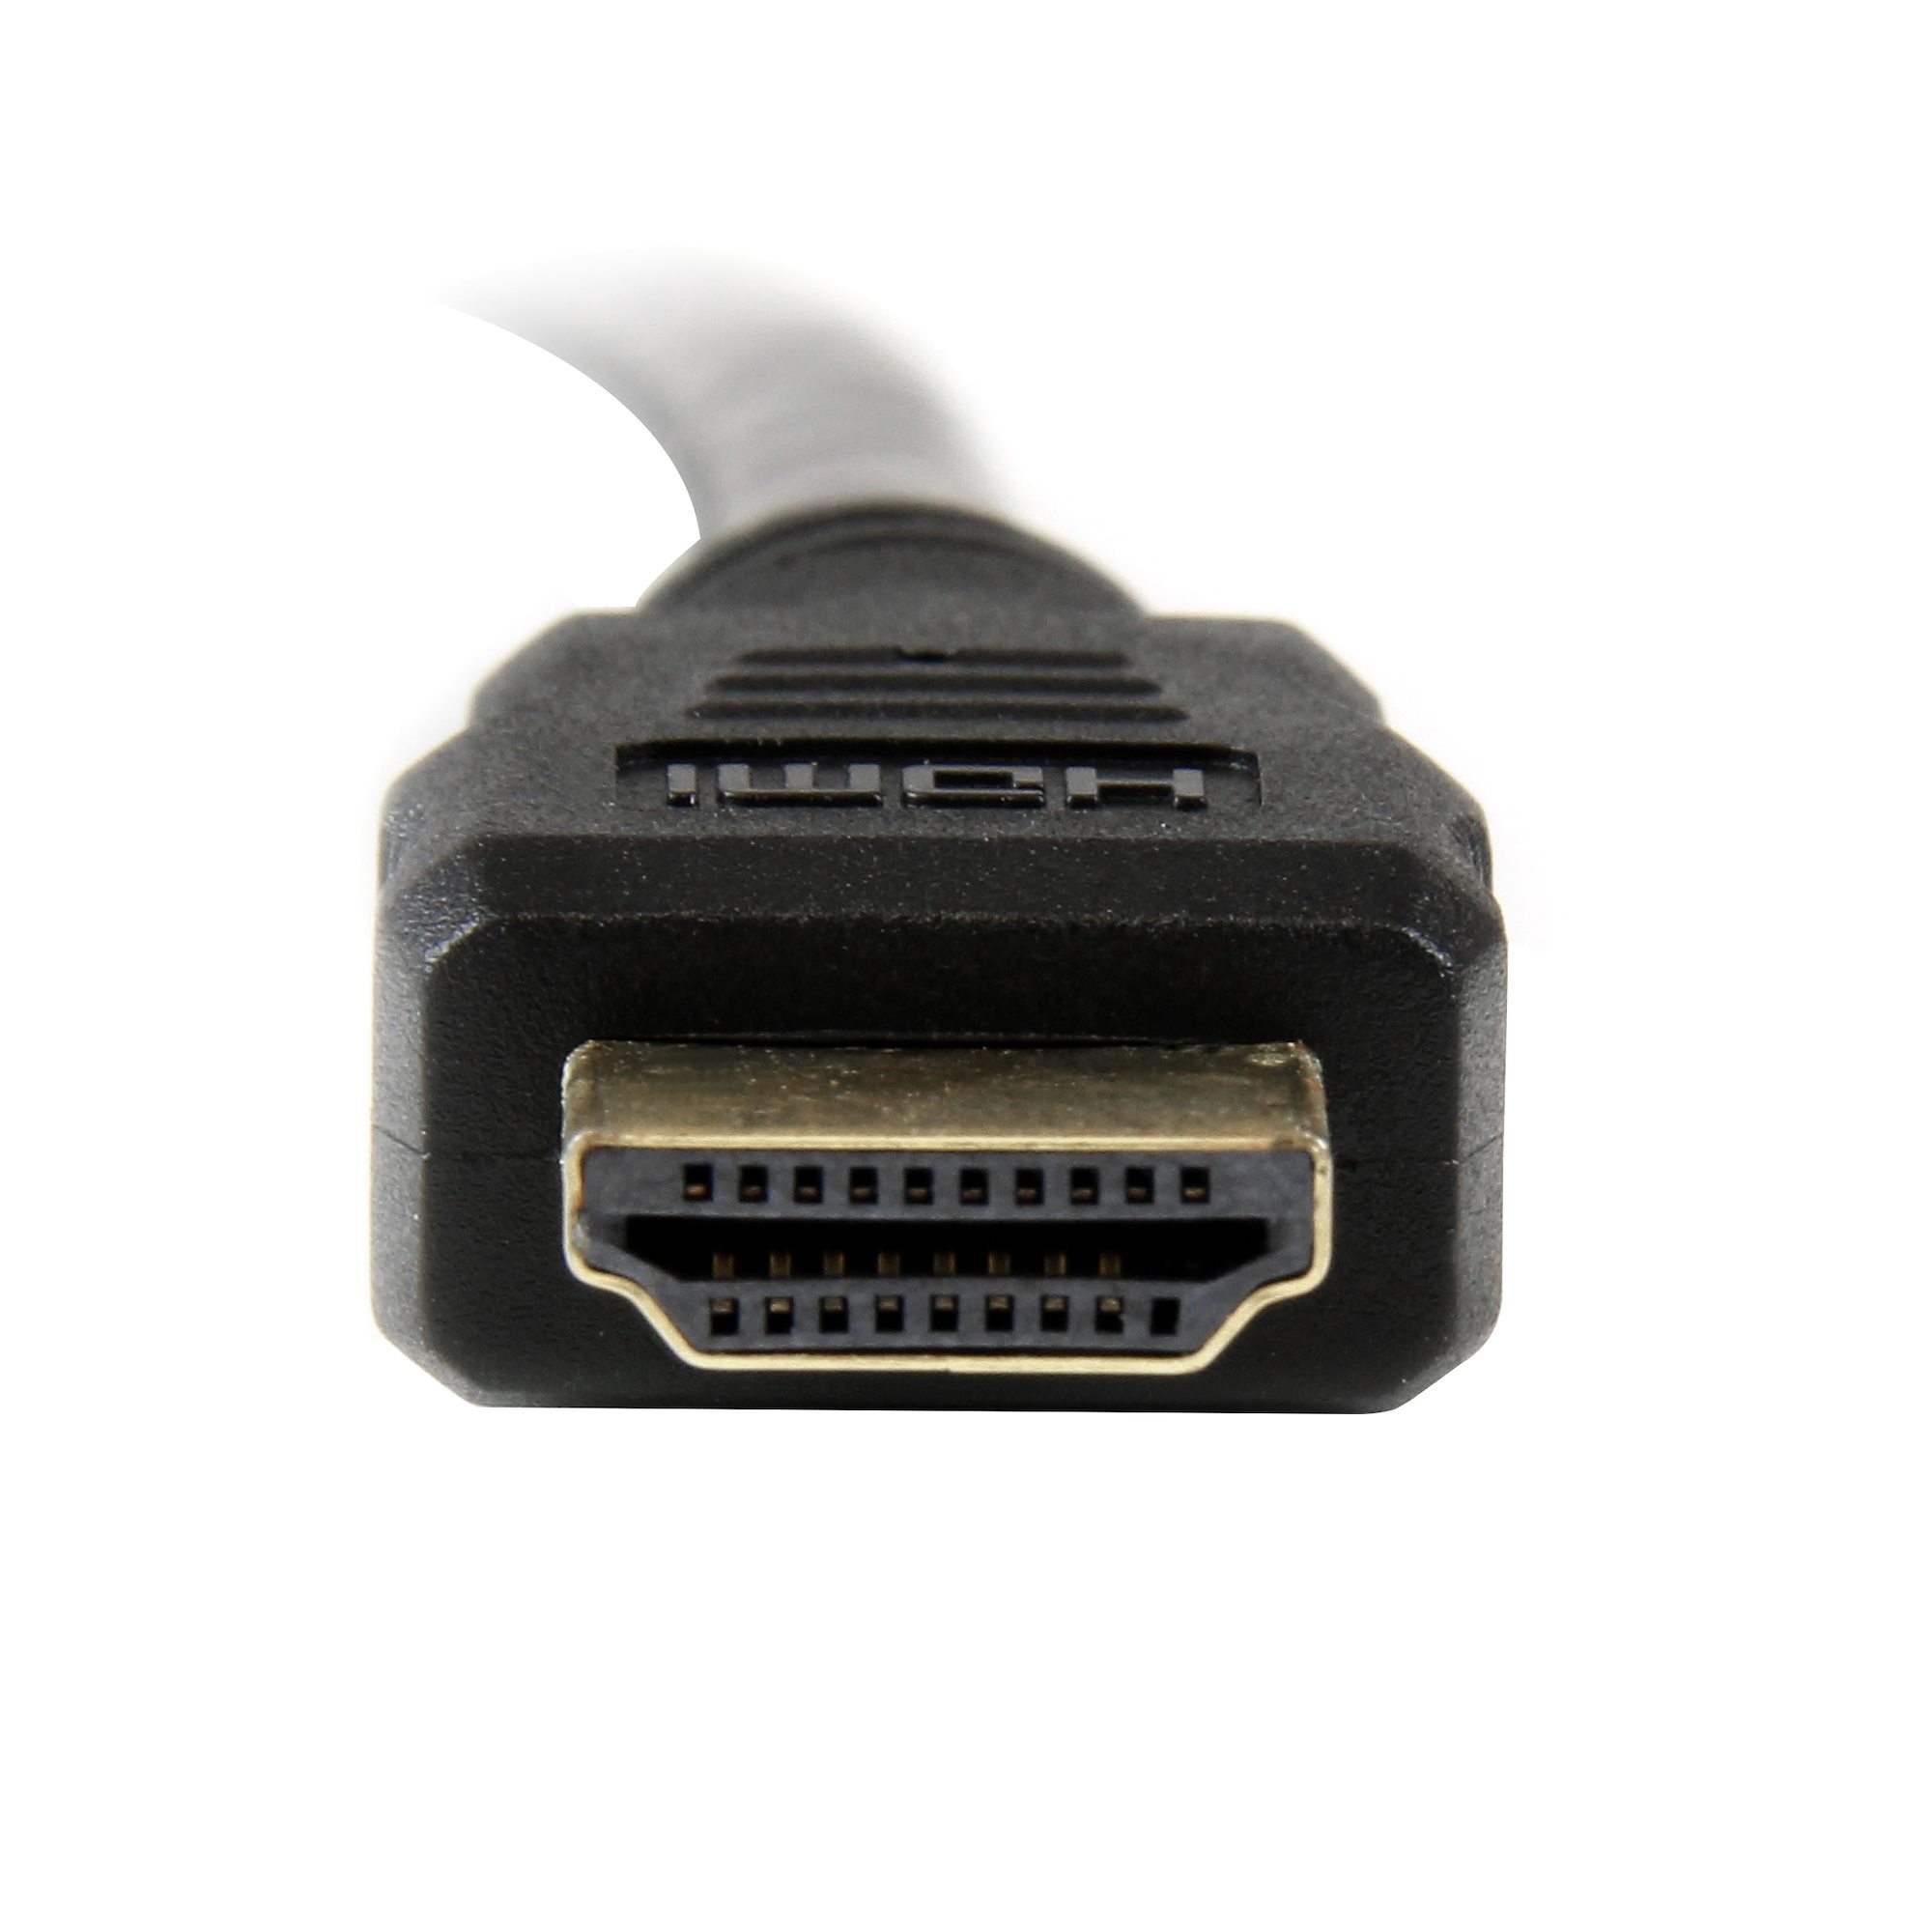 DVI to DVI Cable DVI-D Cable Single Link DVIDSMM10 Male to Male Cable 10 ft 1920x1200 Computer Monitor Cable DVI Cord StarTech.com DVI Cable 